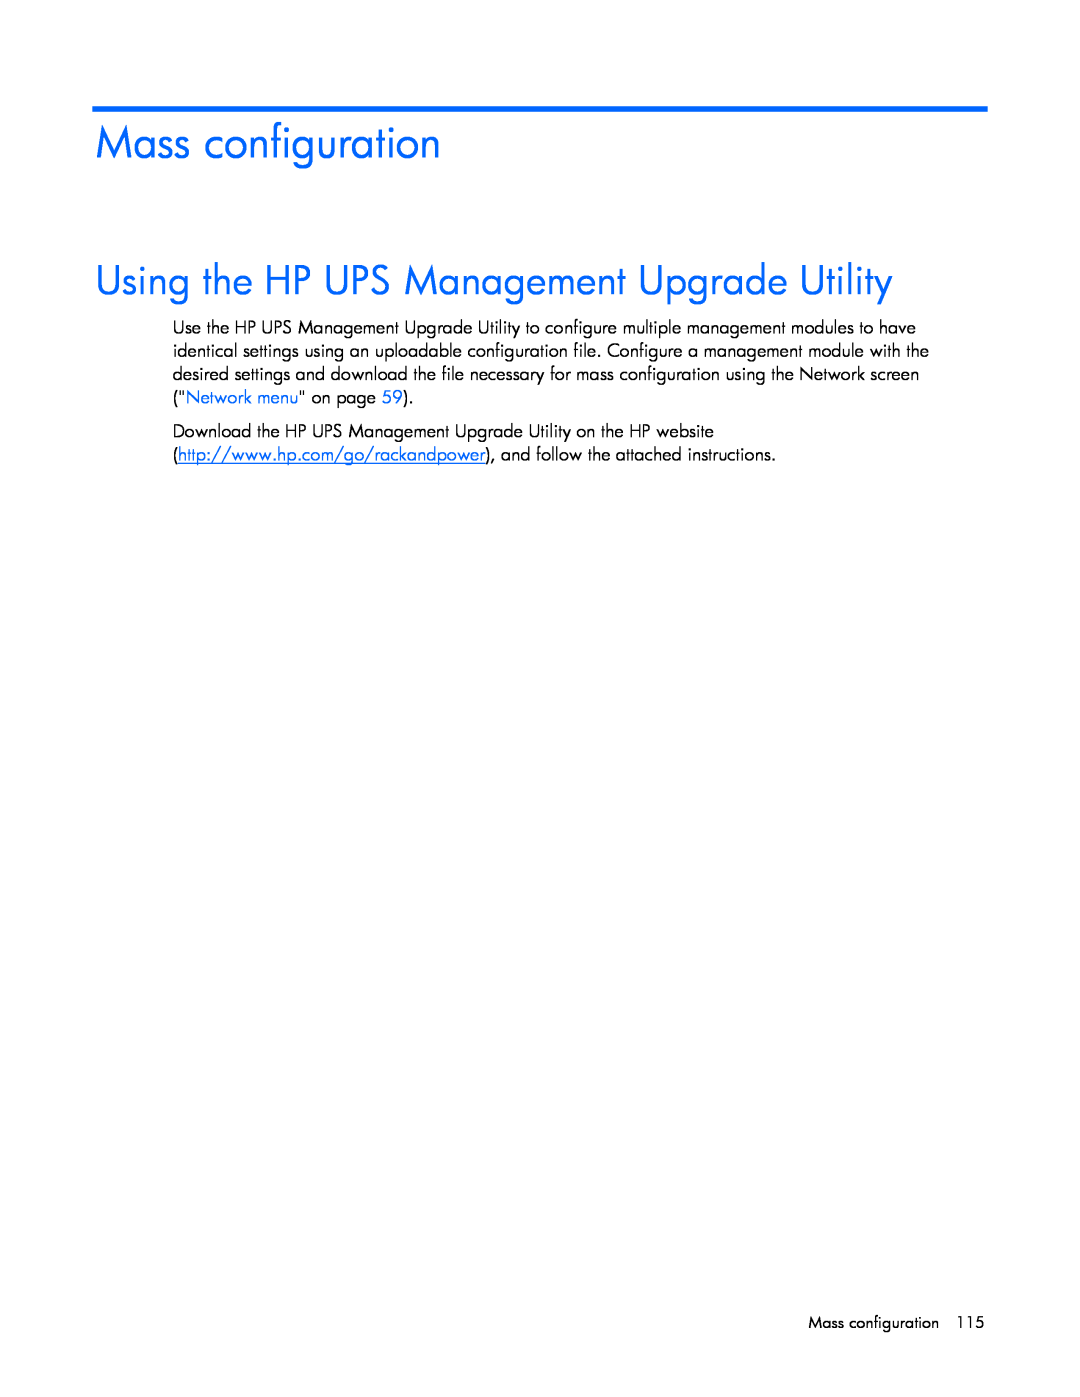 HP A1356A, A6584A, A1354A, A1353A, J4373A, J4370A, J4367A manual Mass configuration, Using the HP UPS Management Upgrade Utility 